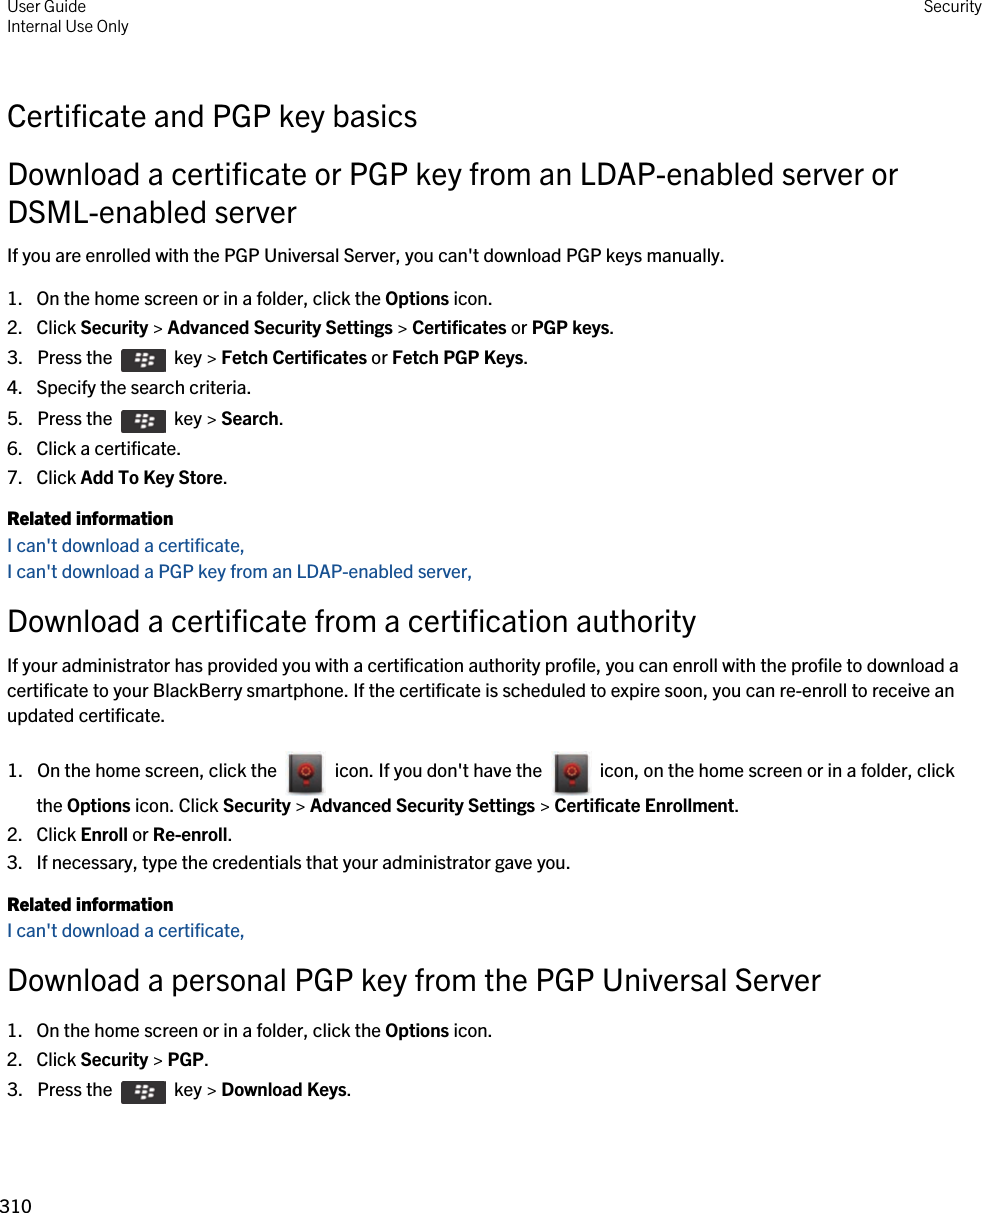 Certificate and PGP key basicsDownload a certificate or PGP key from an LDAP-enabled server or DSML-enabled serverIf you are enrolled with the PGP Universal Server, you can&apos;t download PGP keys manually.1. On the home screen or in a folder, click the Options icon.2. Click Security &gt; Advanced Security Settings &gt; Certificates or PGP keys.3.  Press the    key &gt; Fetch Certificates or Fetch PGP Keys. 4. Specify the search criteria.5.  Press the    key &gt; Search. 6. Click a certificate.7. Click Add To Key Store.Related informationI can&apos;t download a certificate, I can&apos;t download a PGP key from an LDAP-enabled server, Download a certificate from a certification authorityIf your administrator has provided you with a certification authority profile, you can enroll with the profile to download a certificate to your BlackBerry smartphone. If the certificate is scheduled to expire soon, you can re-enroll to receive an updated certificate.1.  On the home screen, click the    icon. If you don&apos;t have the    icon, on the home screen or in a folder, click the Options icon. Click Security &gt; Advanced Security Settings &gt; Certificate Enrollment. 2. Click Enroll or Re-enroll.3. If necessary, type the credentials that your administrator gave you.Related informationI can&apos;t download a certificate, Download a personal PGP key from the PGP Universal Server1. On the home screen or in a folder, click the Options icon.2. Click Security &gt; PGP.3.  Press the    key &gt; Download Keys. User GuideInternal Use Only Security310 